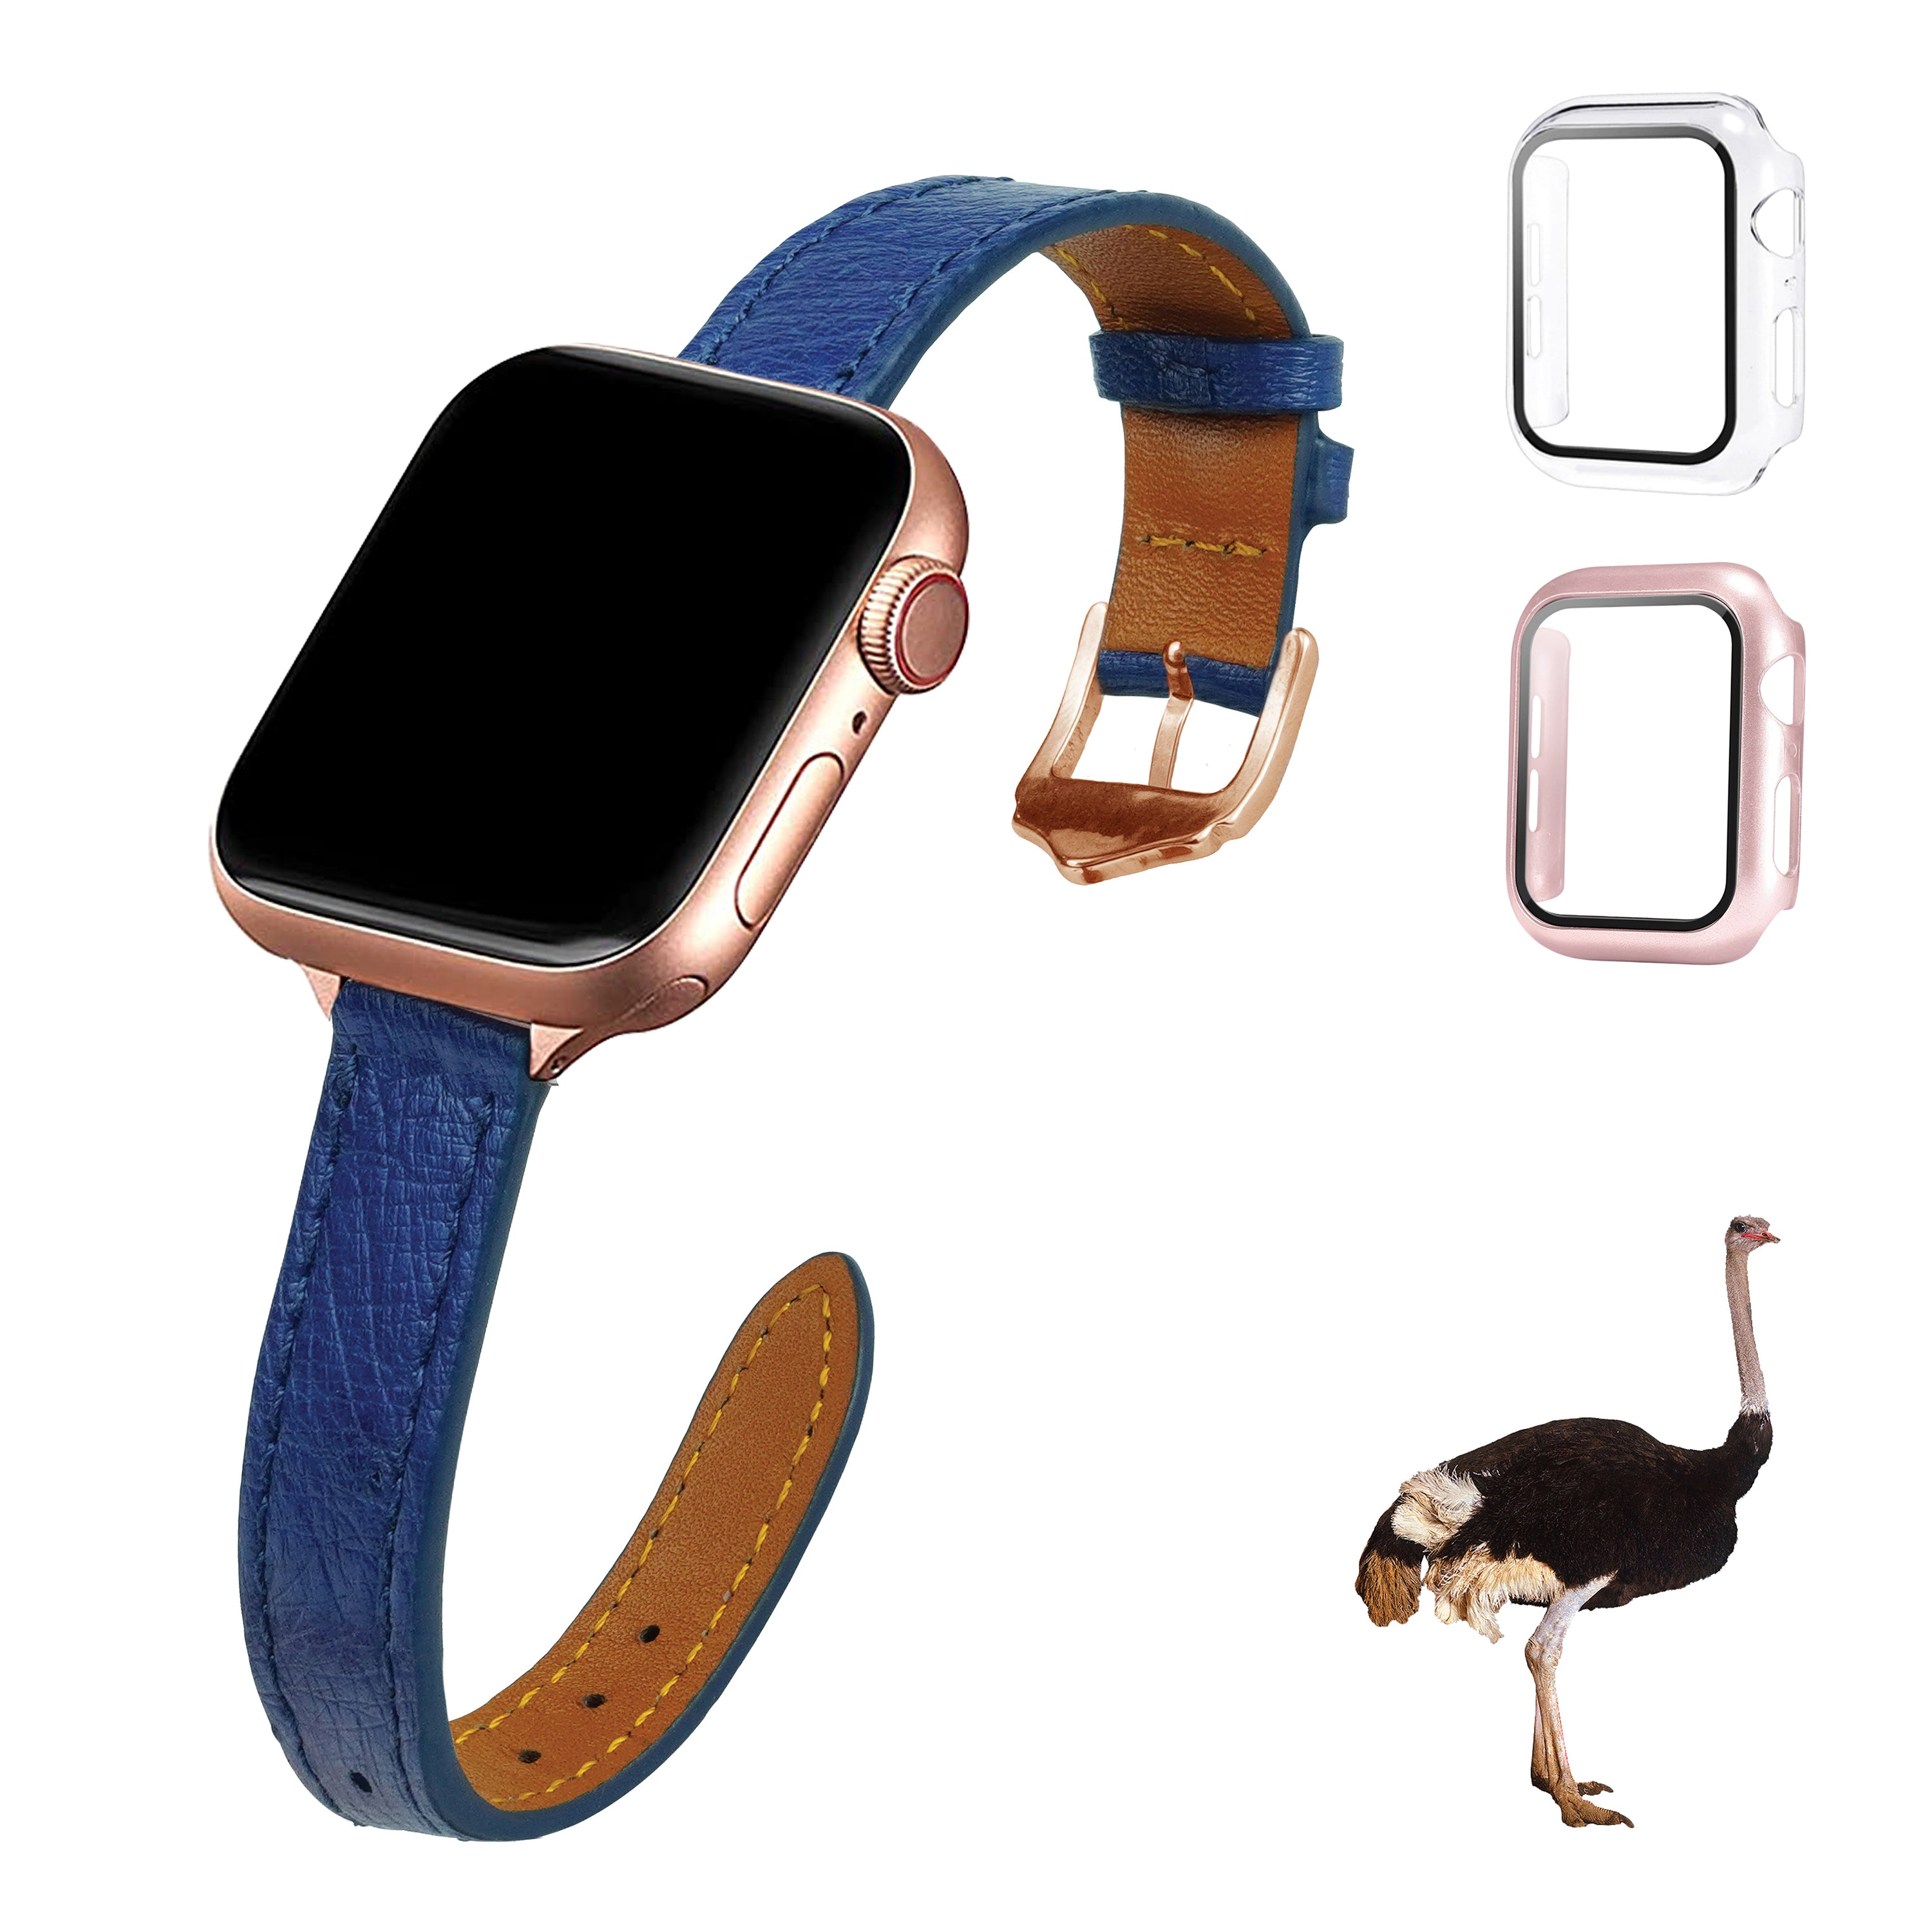 Blue Flat Ostrich Leather Band Compatible Apple Watch Iwatch 42mm Screen Protector Case Black Adapter Replacement Strap For Smartwatch Series 1 2 3 Leather Handmade AW-184G-W-42MM